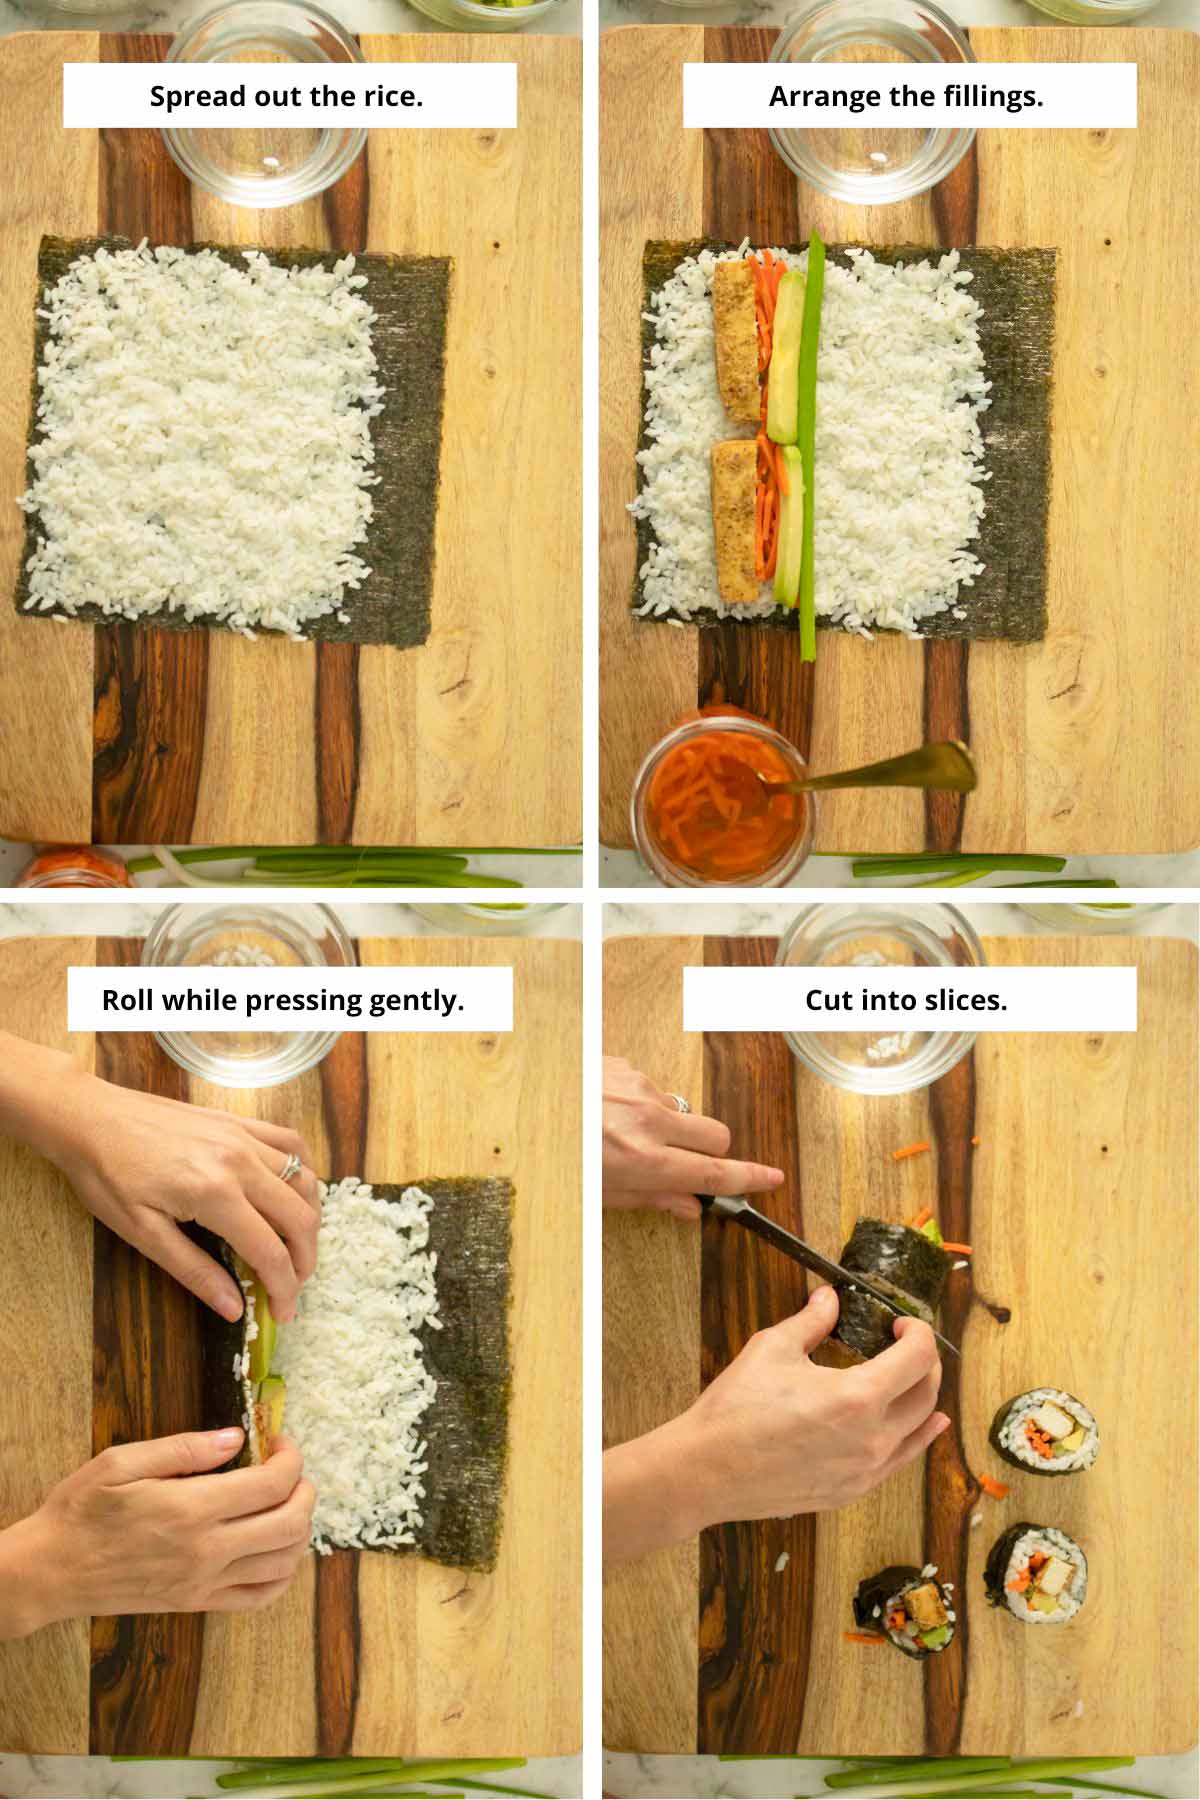 image collage showing nori sheet with rice on it, then with fillings added, then being rolled up, then being sliced